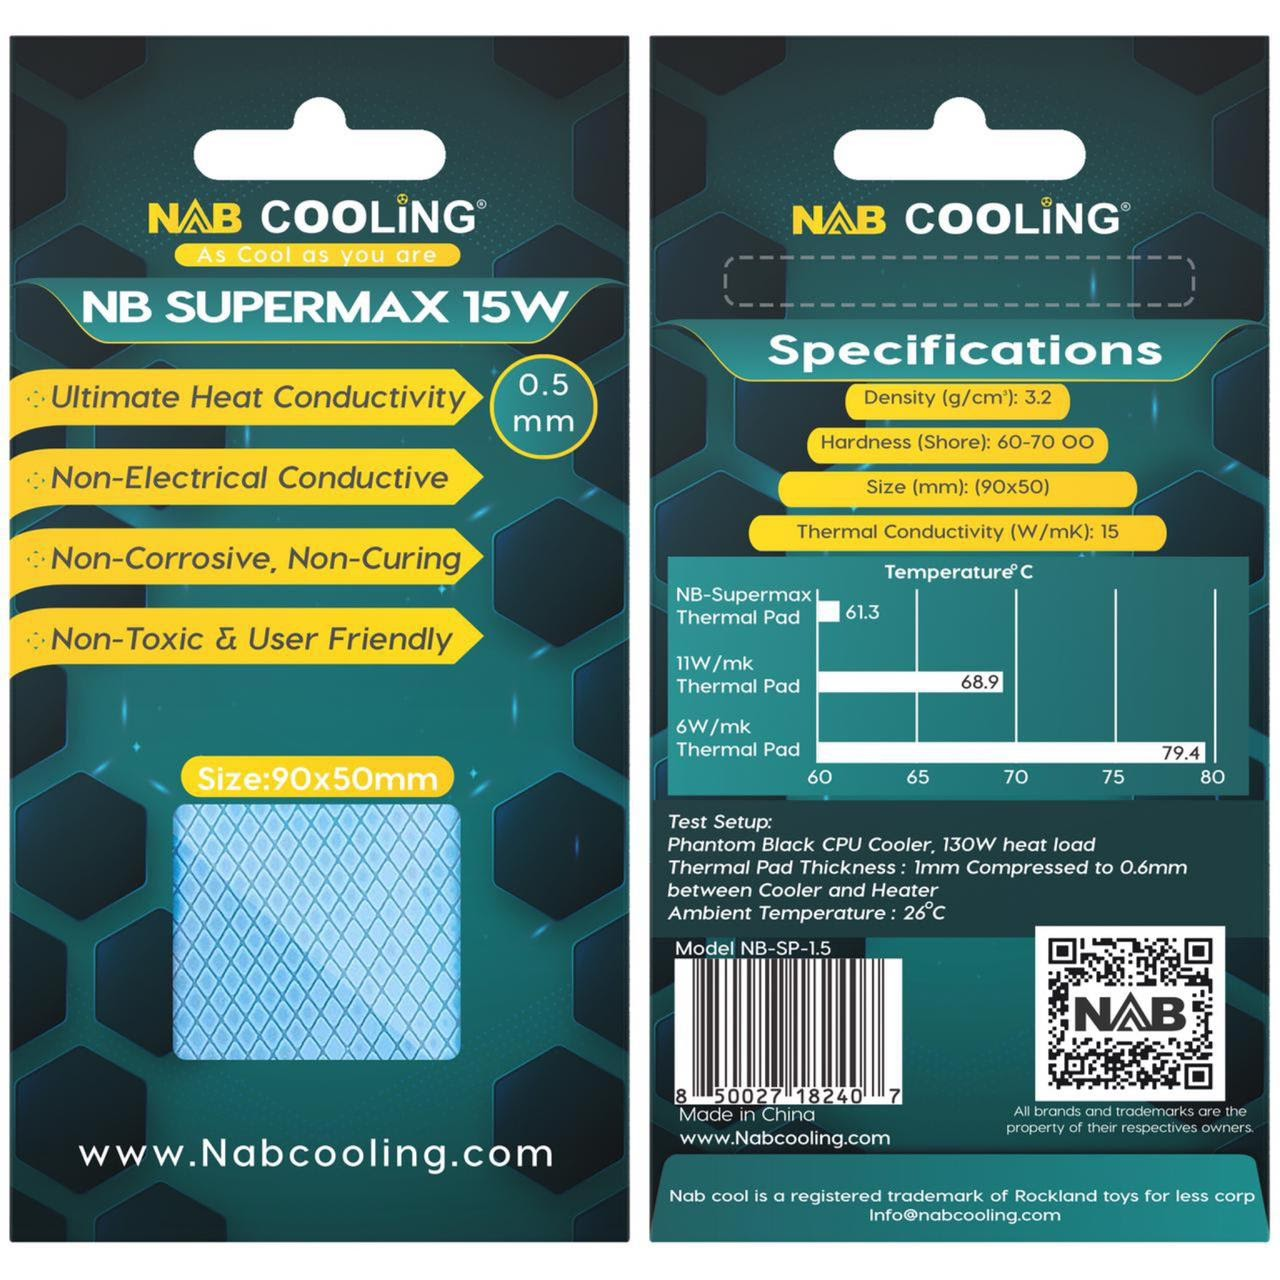 7 Reasons Why Silicone Thermal Pad Is The Best - NabCooling